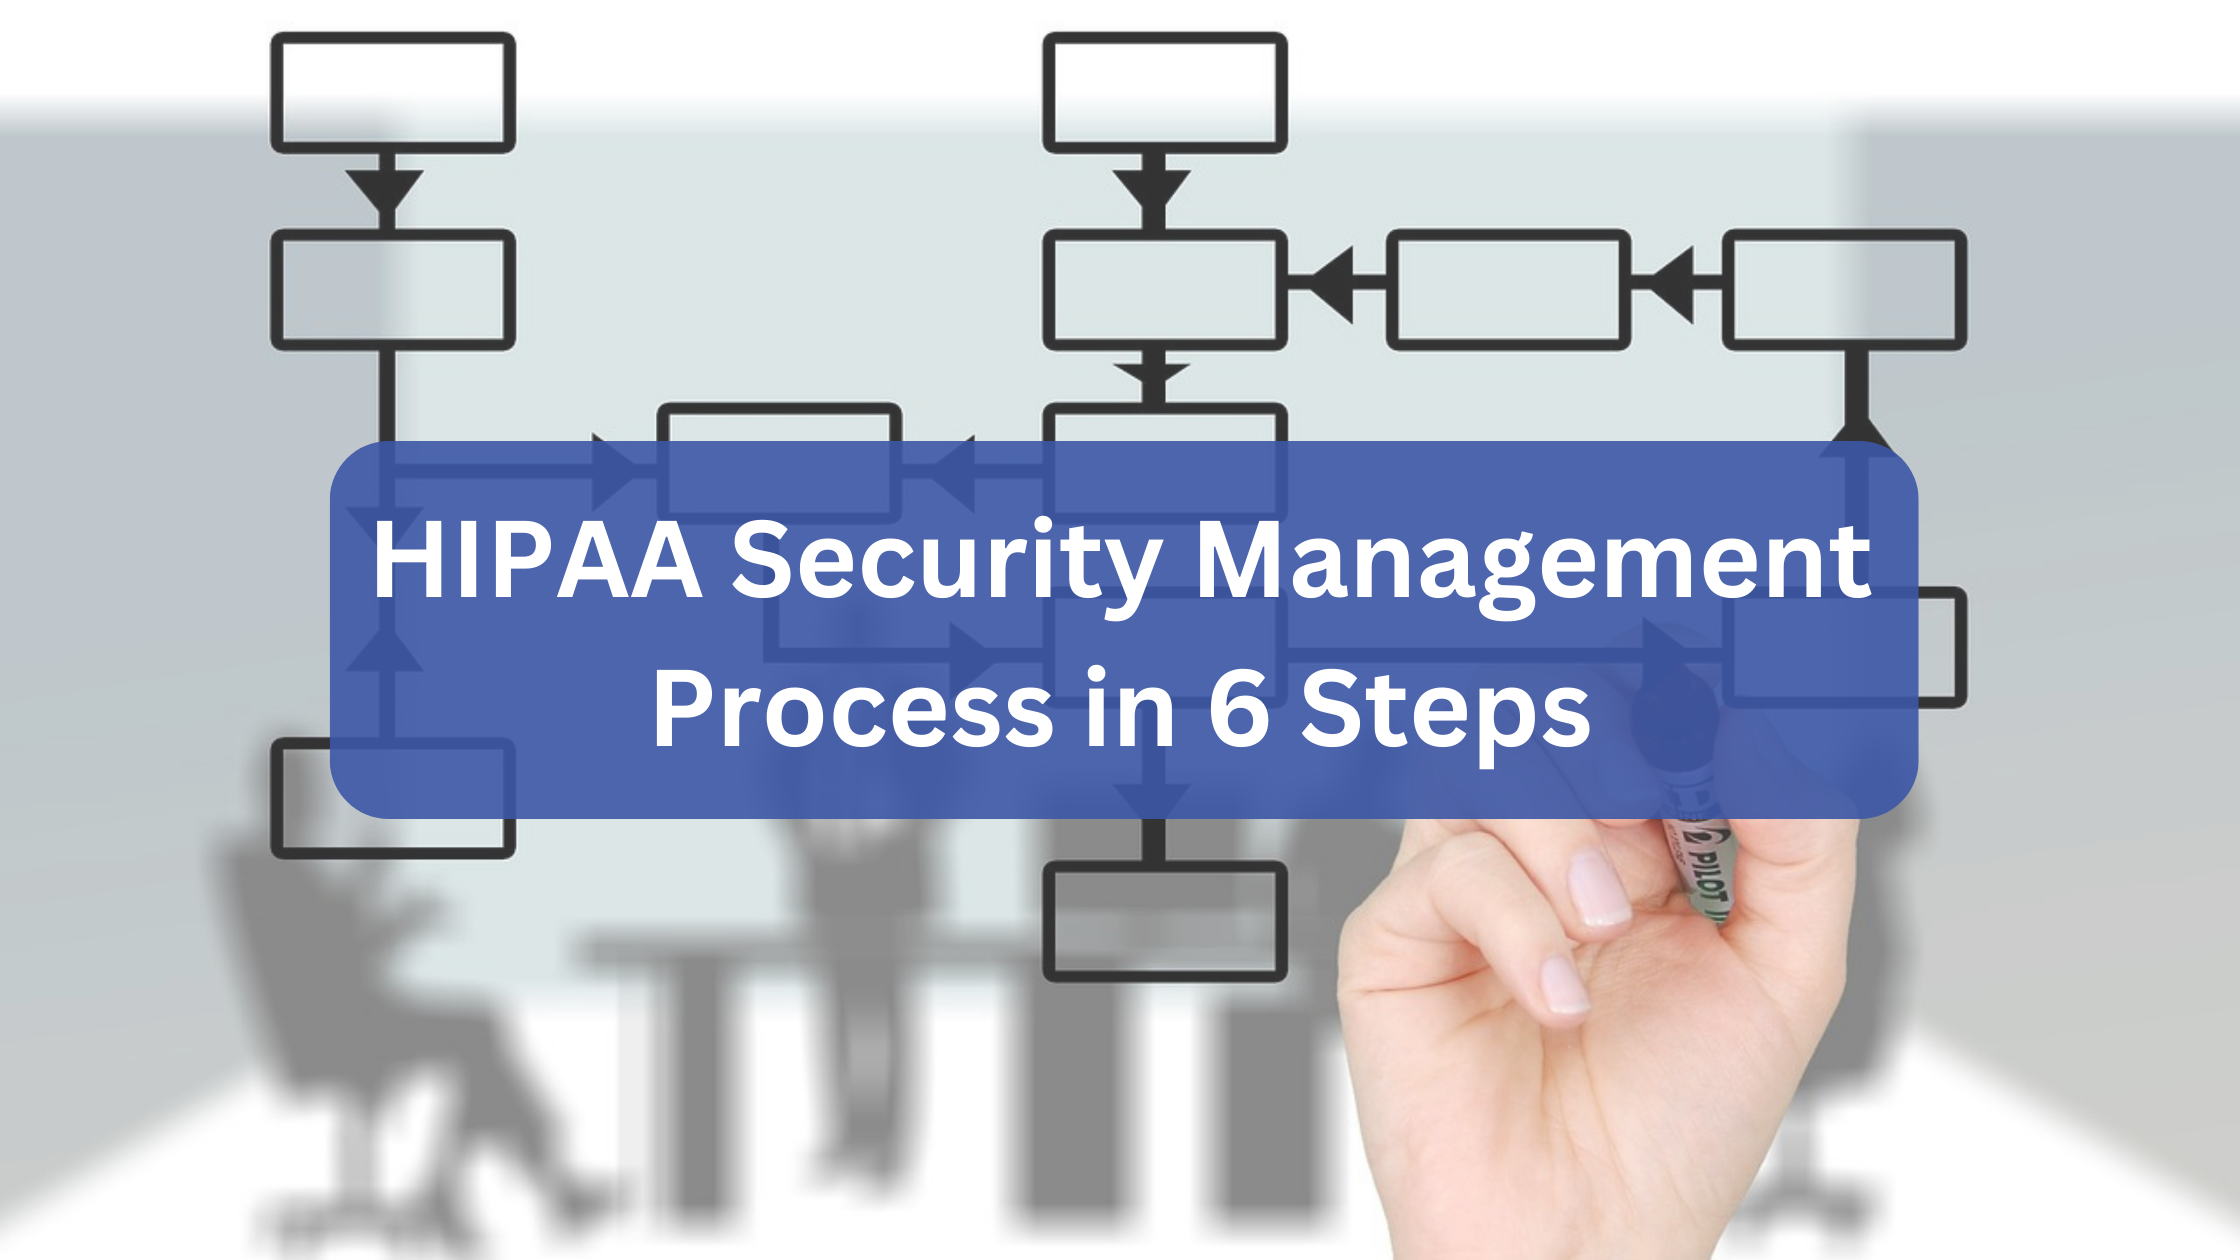 HIPAA Security Management Process in 6 Steps